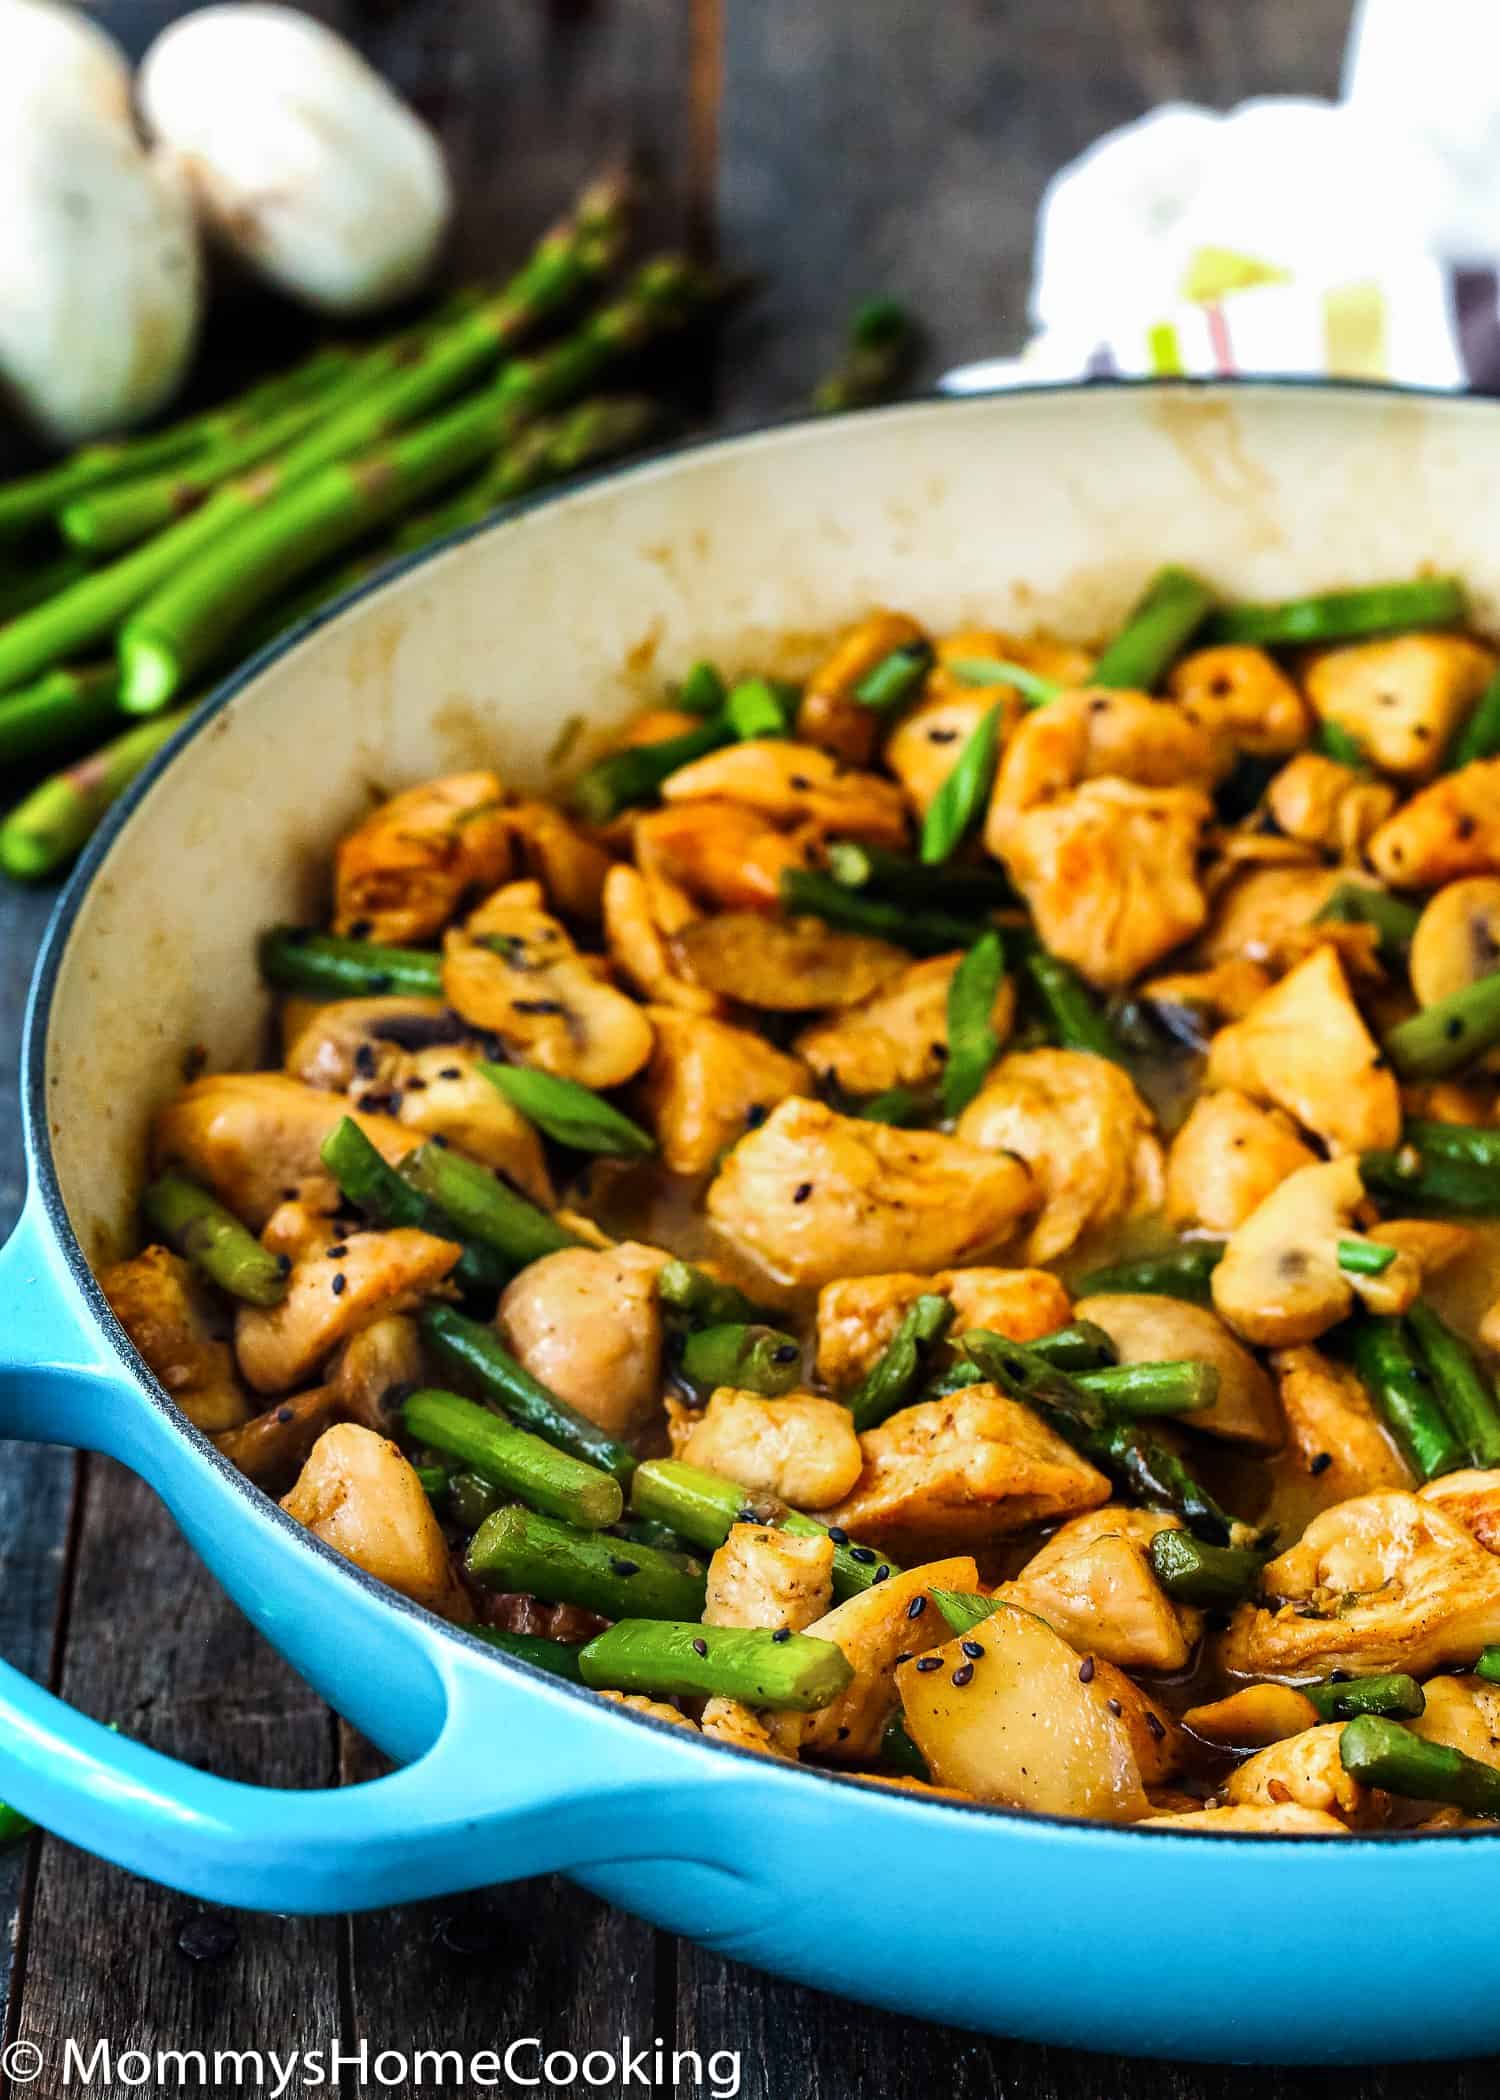 Easy Healthy Chicken and Asparagus Skillet - Mommy's Home Cooking